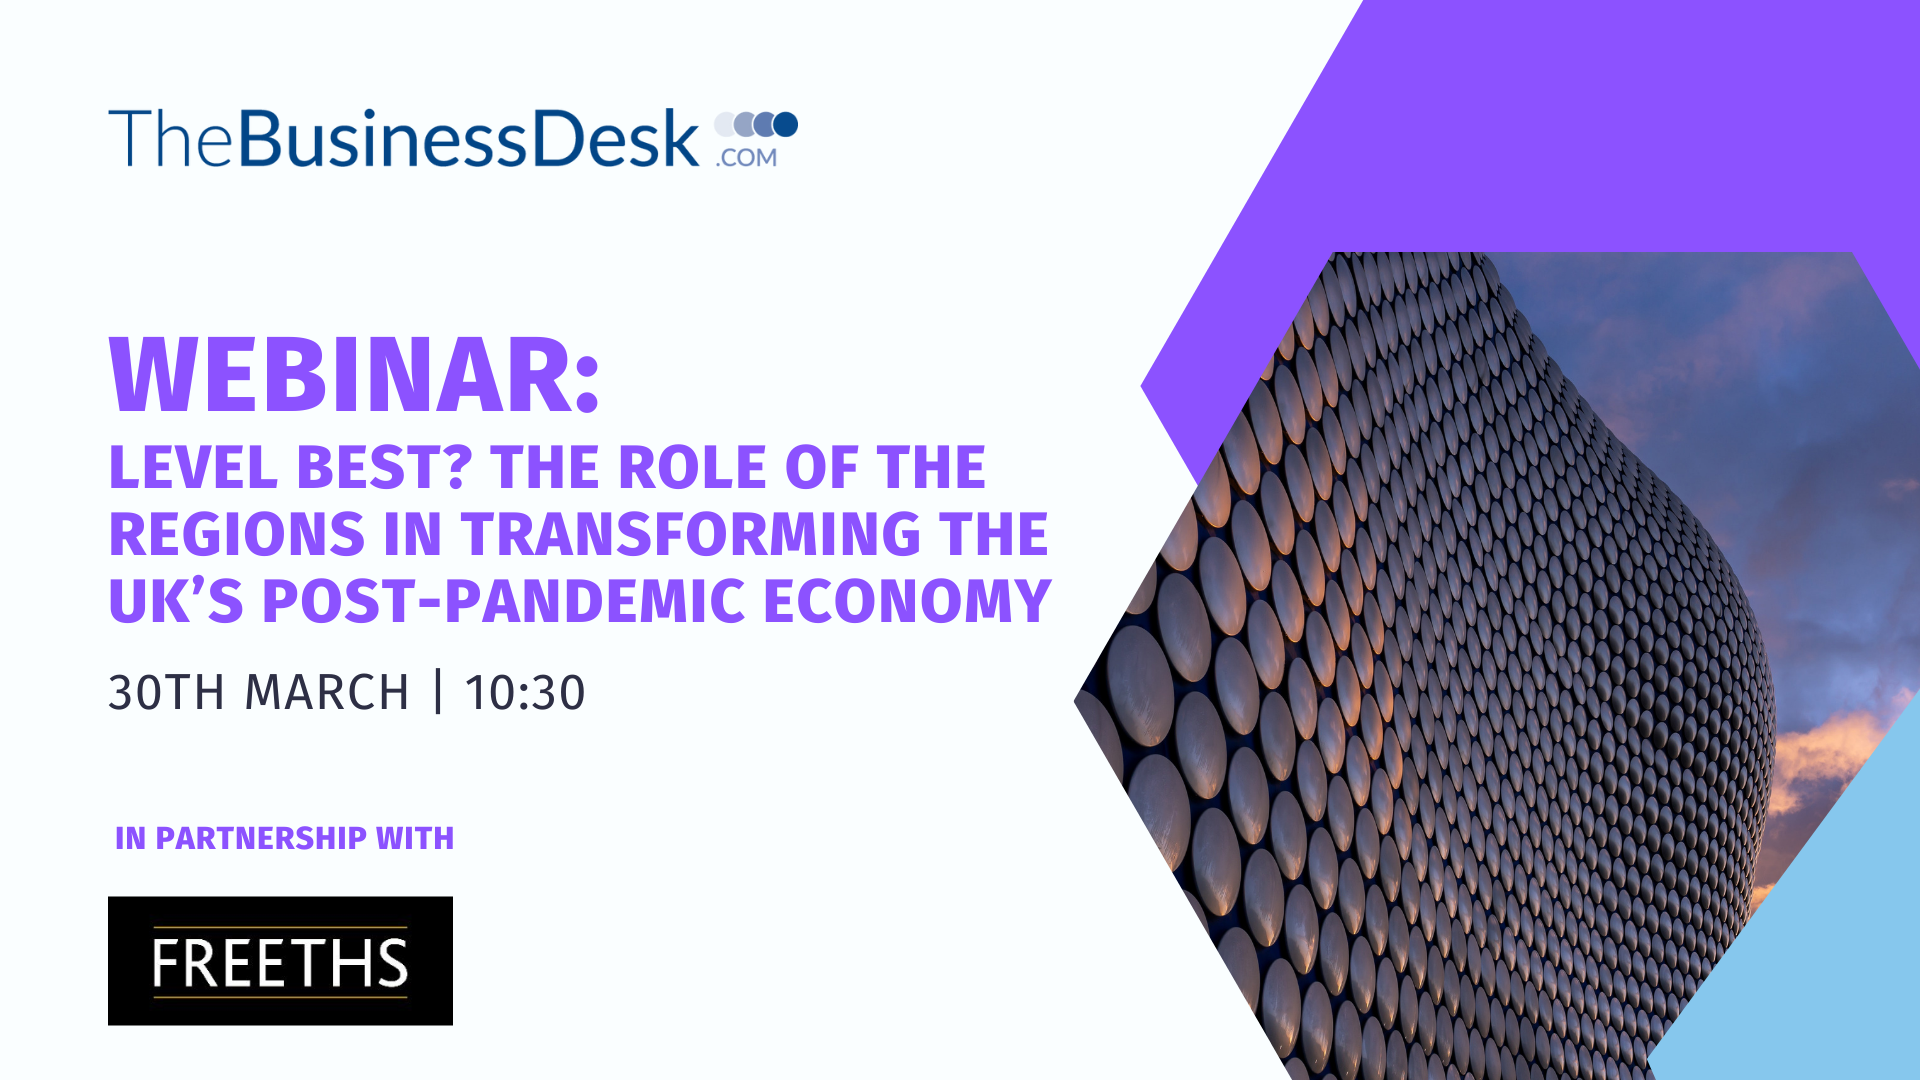 Flyer for a Business Desk webinar on the post-pandemic economy